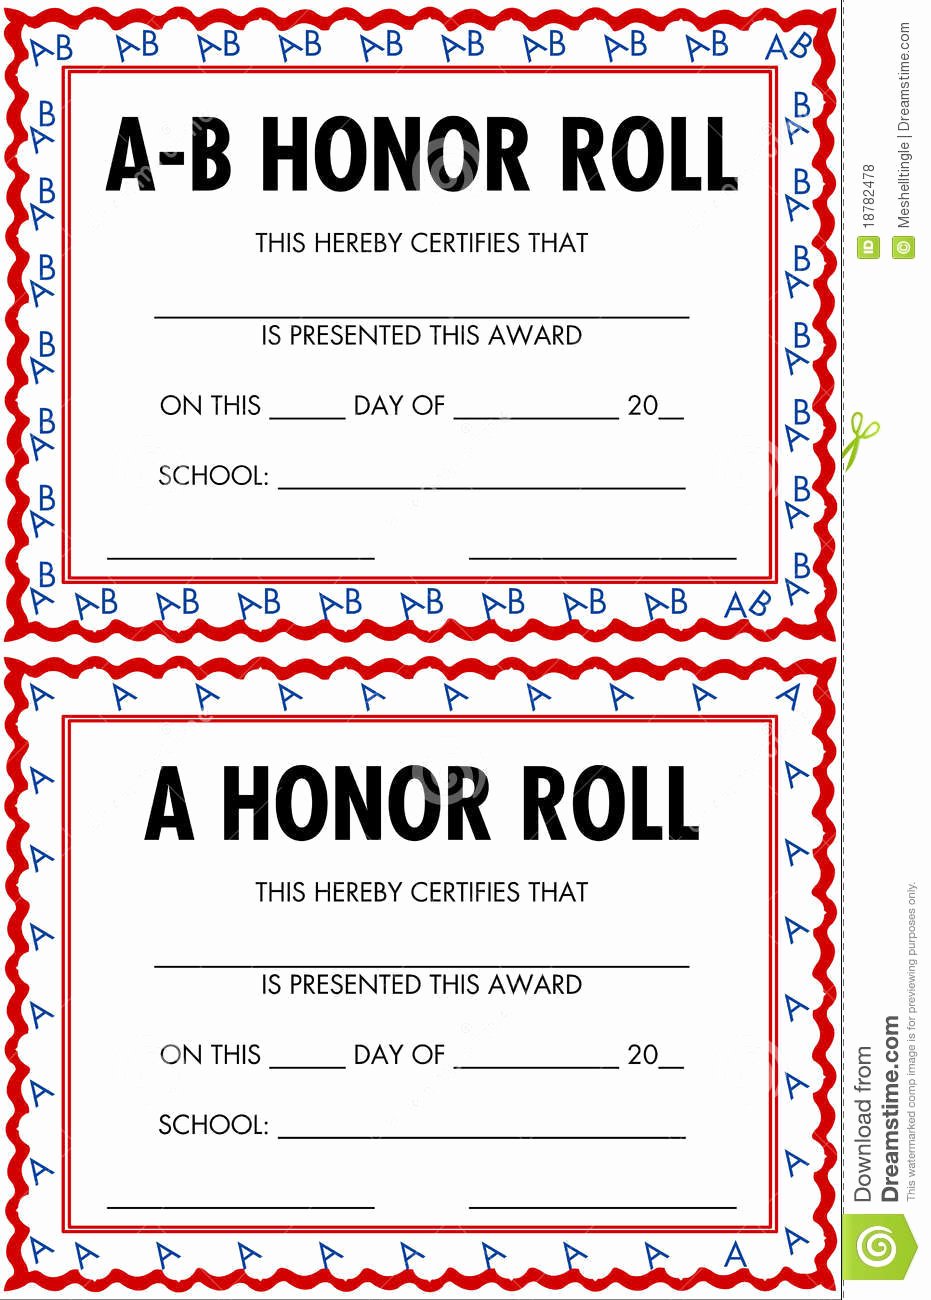 Honor Roll Certificate Templates Free Best Of Honor Roll Certificates Stock Vector Illustration Of Black